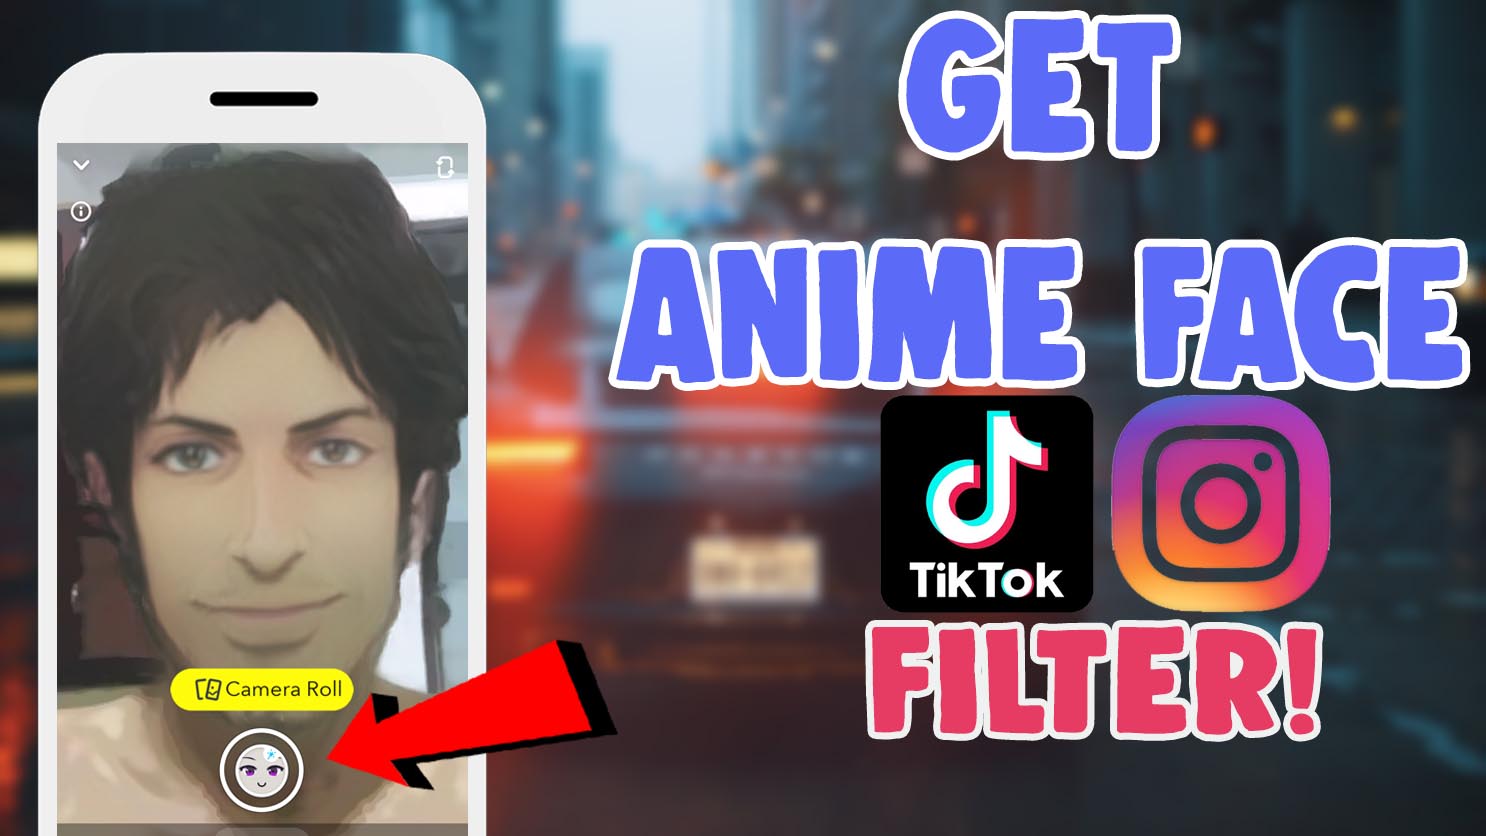 Featured image of post Instagram Anime Filter Unfortunately if you re looking to find this anime filter on tiktok you ll have a hard time finding it as